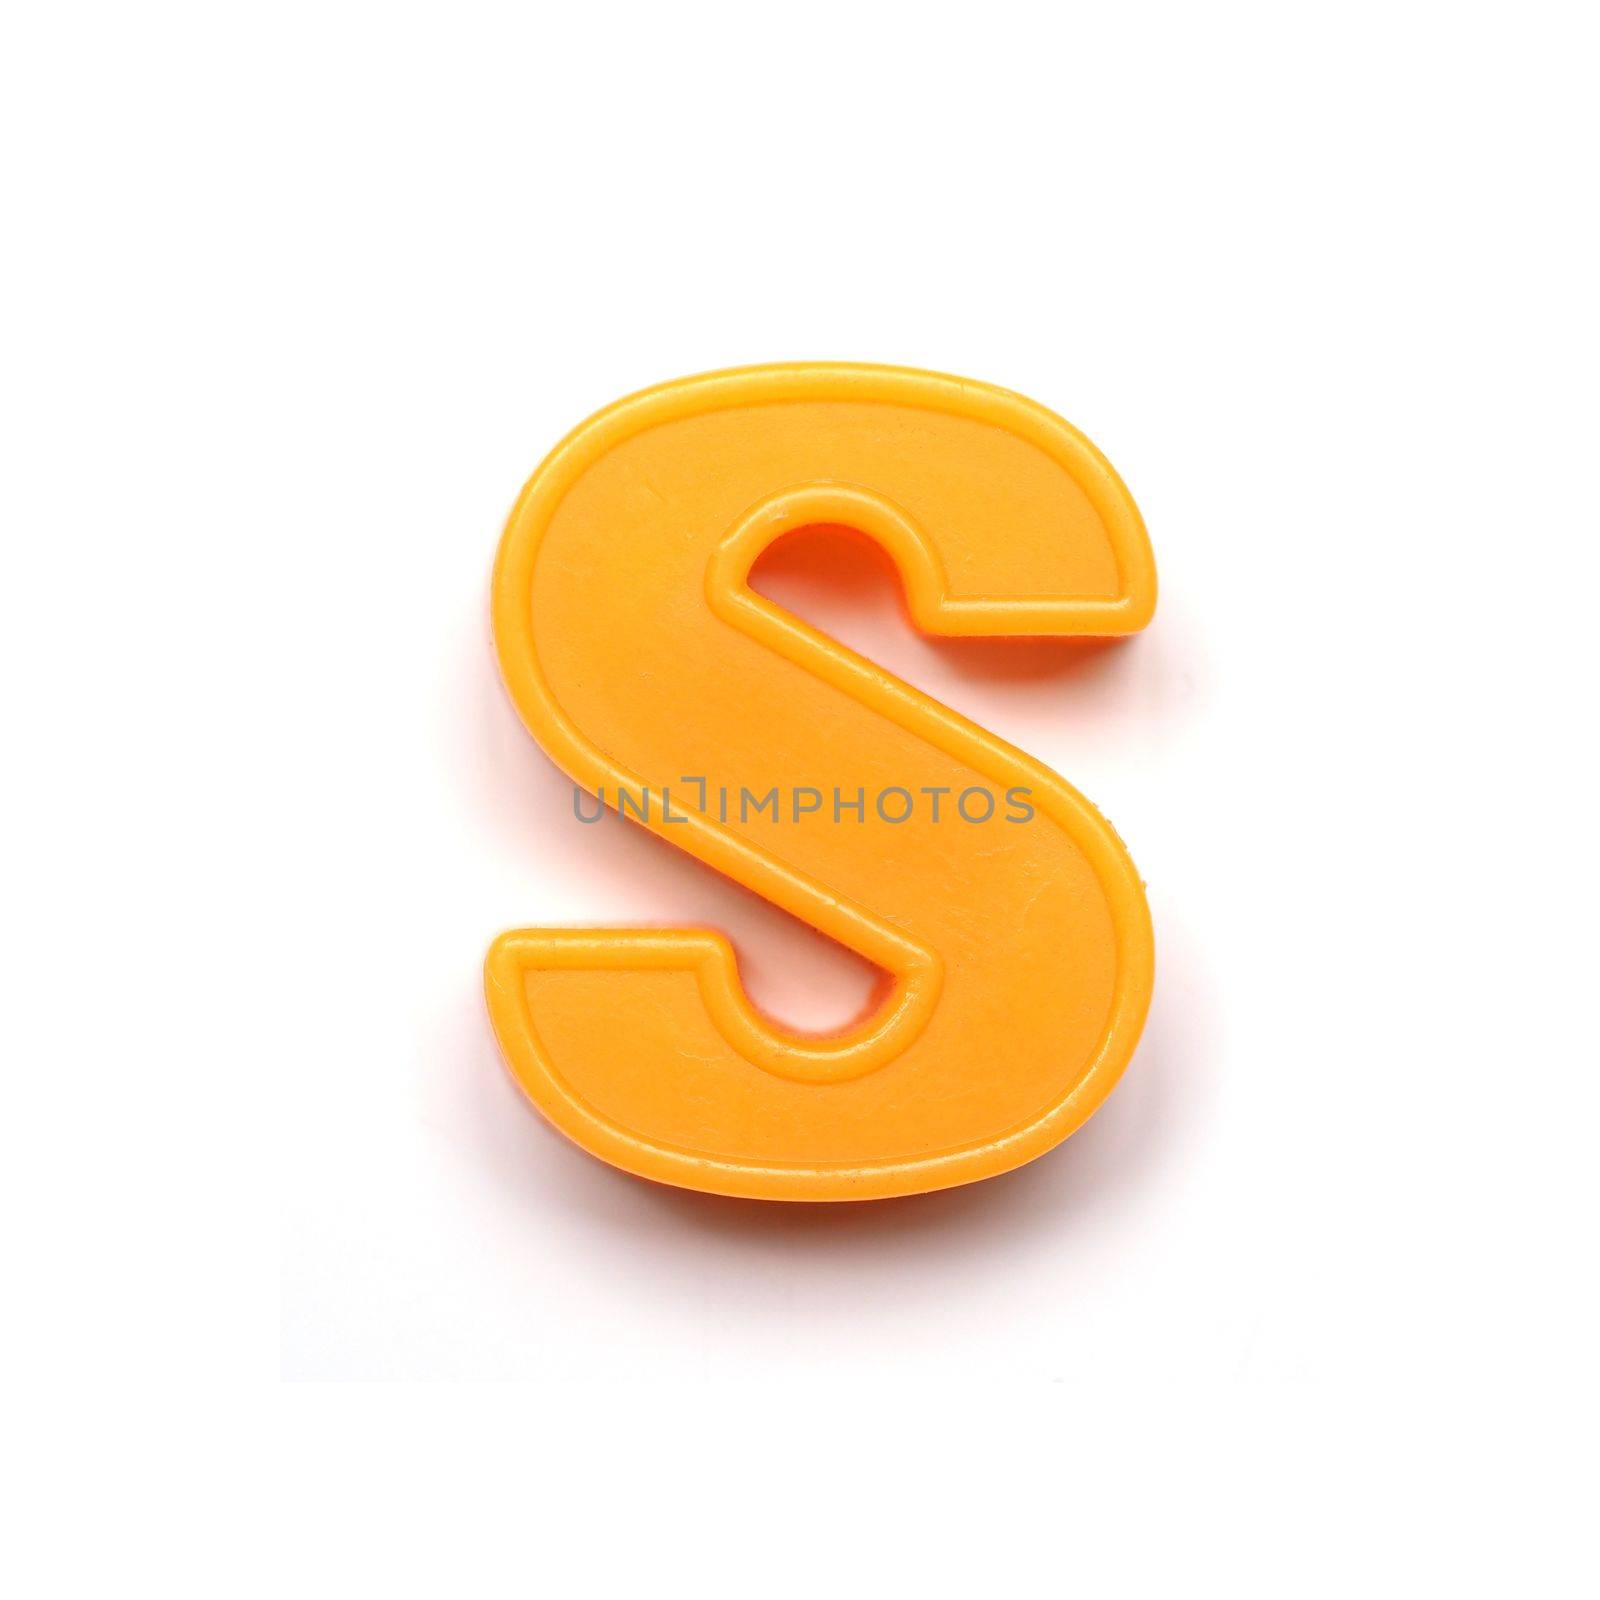 Magnetic lowercase letter S by claudiodivizia